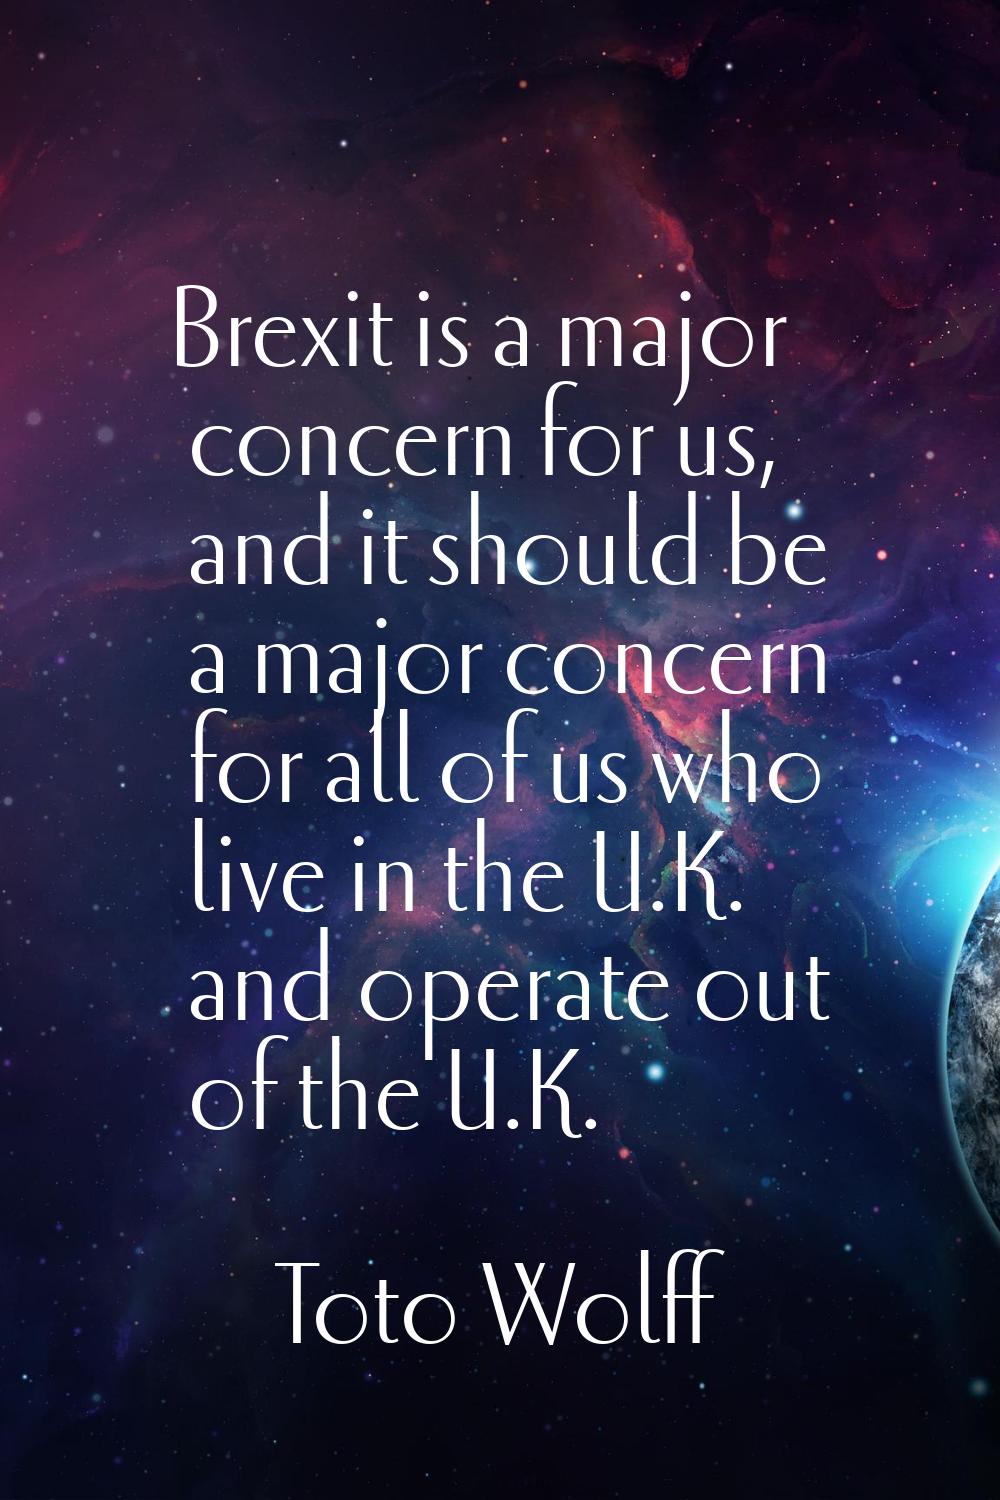 Brexit is a major concern for us, and it should be a major concern for all of us who live in the U.